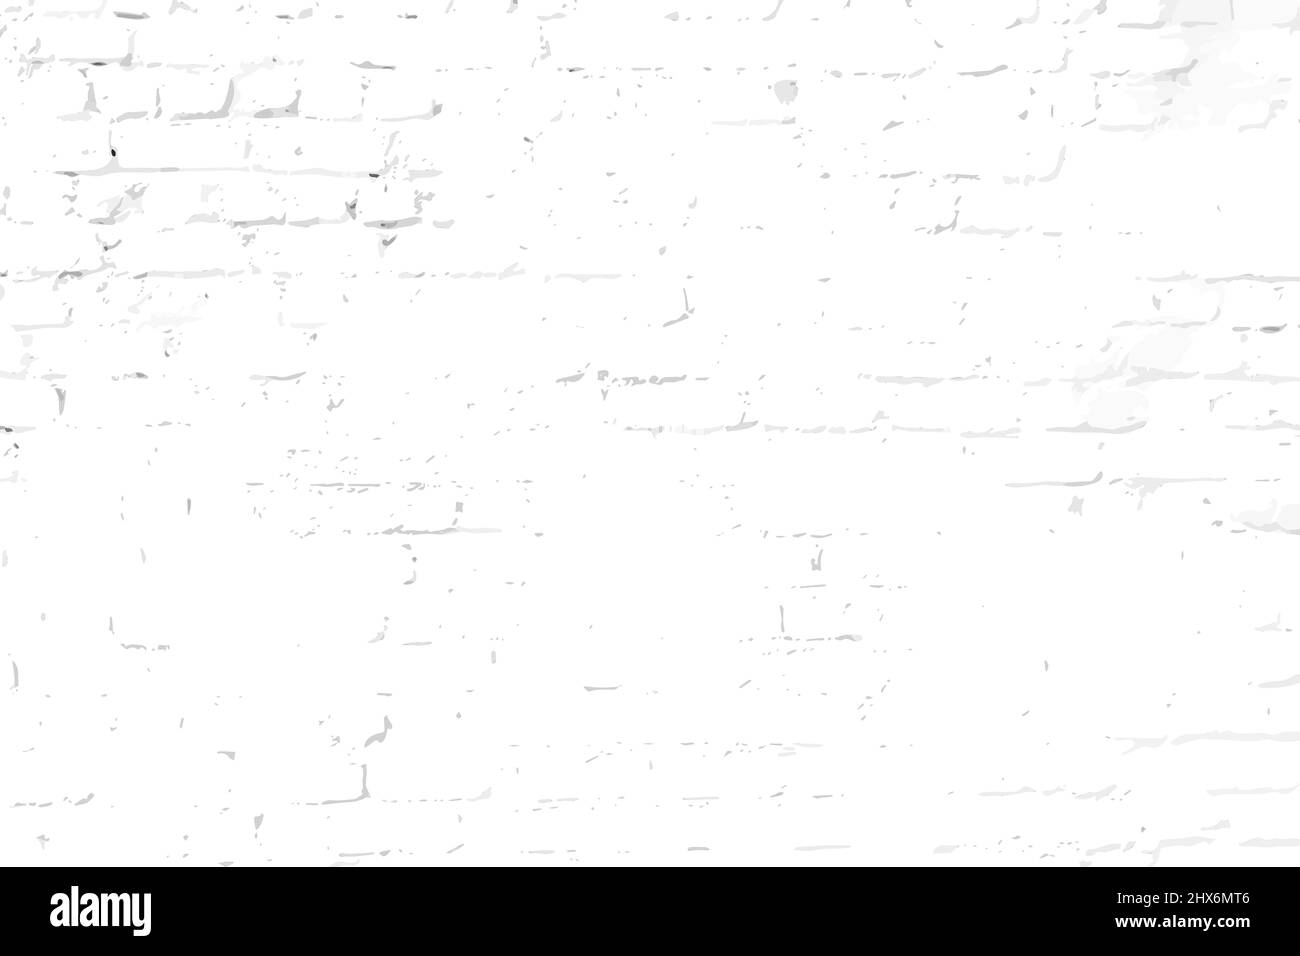 Bleached brick wall Abstract background illustration Stock Photo